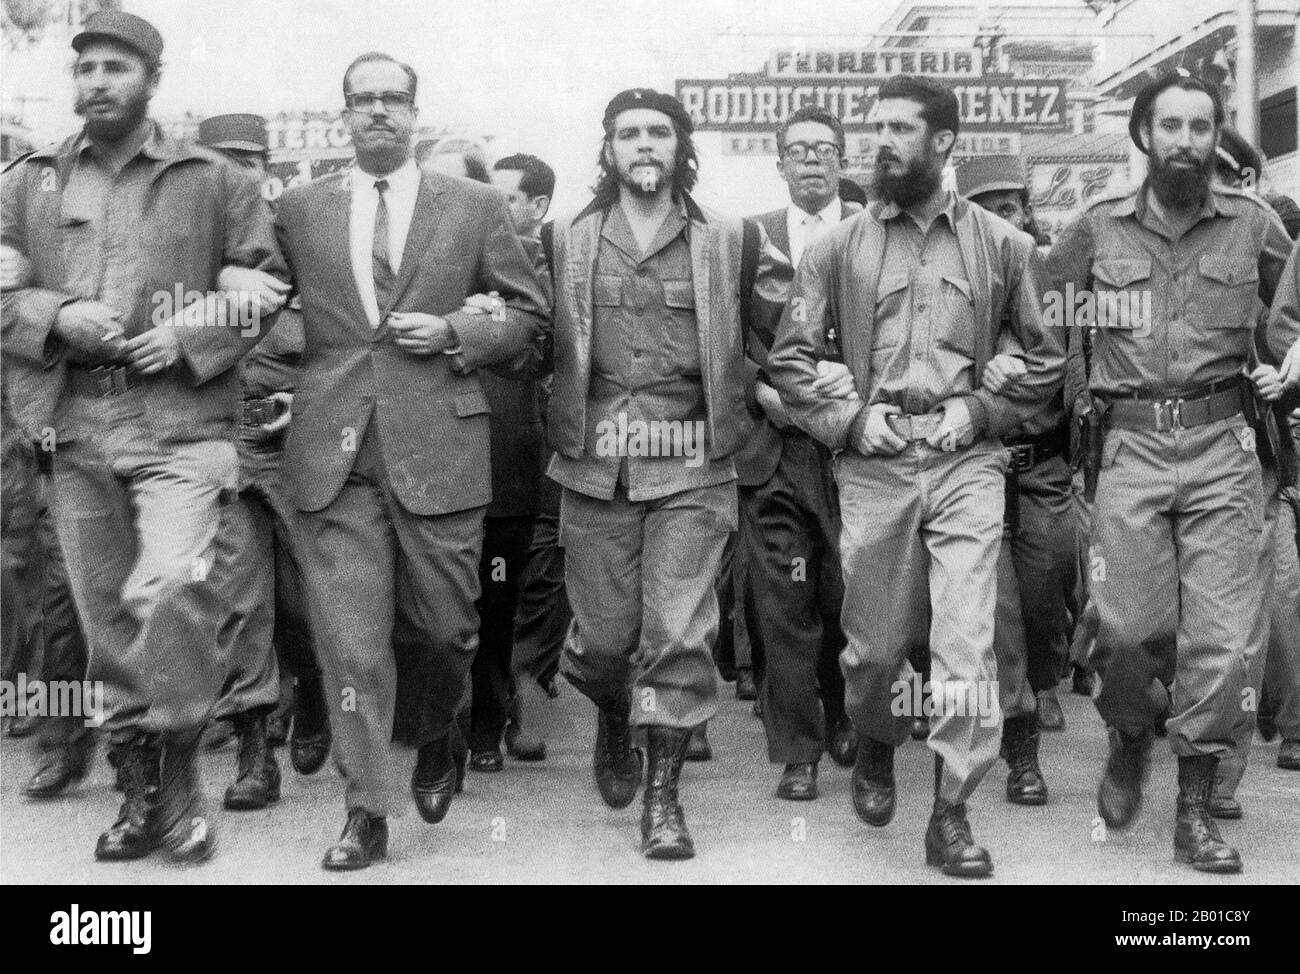 Cuba: 5 March 1960: Memorial service march for victims of the La Coubre explosion in Havana. On the far left of the photo is Fidel Castro, while in the centre is Che Guevara.  The freighter La Coubre exploded at 3:10 p.m. on 4 March 1960, while it was being unloaded in Havana harbour, Cuba. This 4,310-ton French vessel was carrying 76 tons of Belgian munitions from the port of Antwerp. Unloading explosive ordnance directly onto the dock was against port regulations. Ships with such cargoes were supposed to be moored in the centre of the harbour and their high-risk cargo unloaded onto lighters. Stock Photo